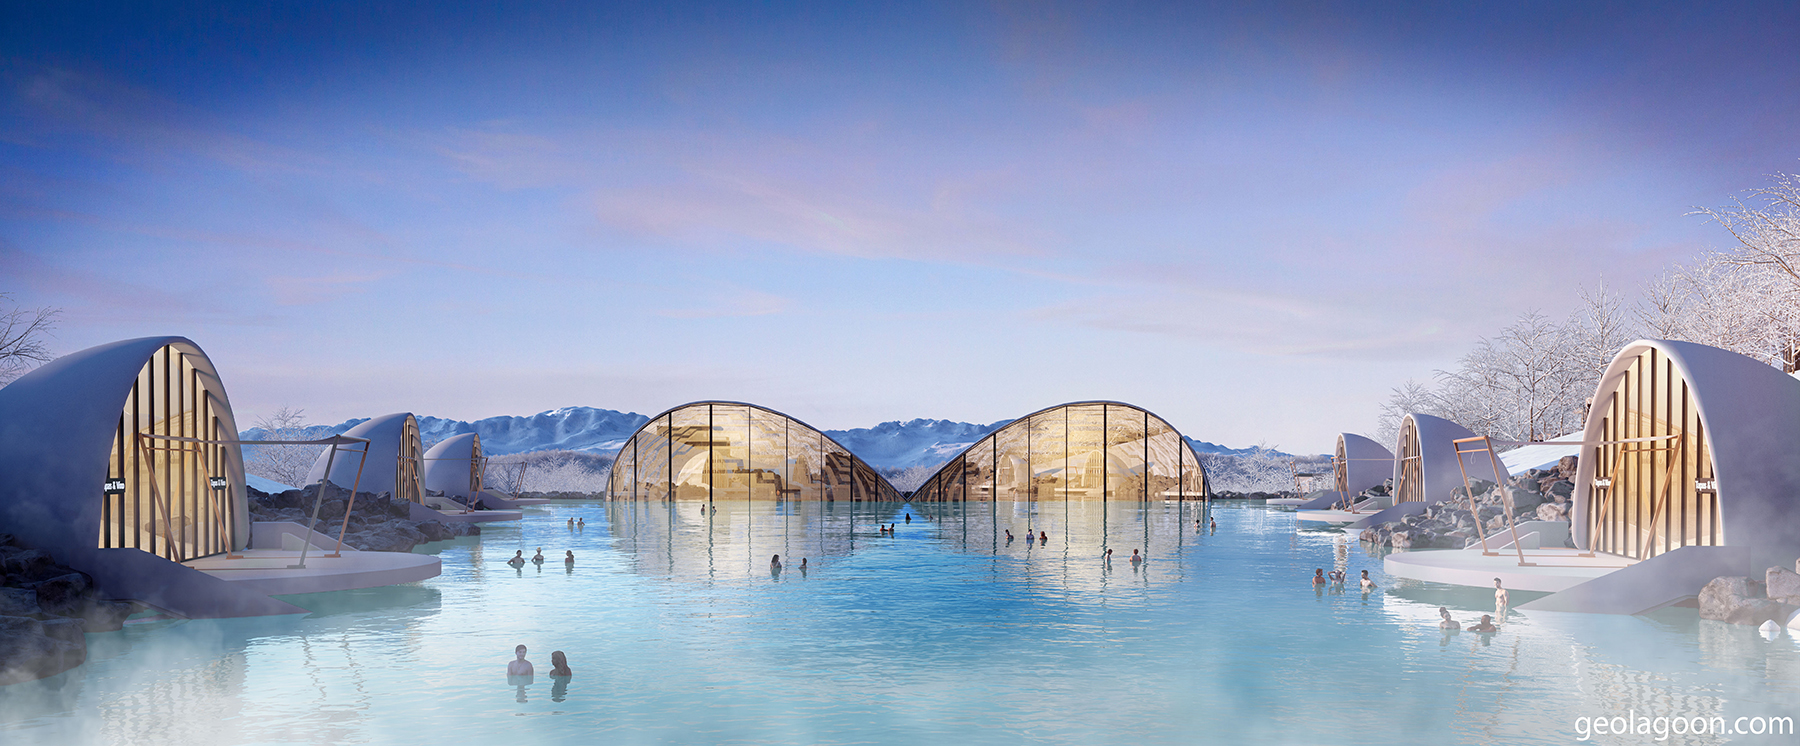 HEAT RISES OFF A GEOTHERMAL LAGOON SURRROUNDED BY LIGHT-FILLED BUILDINGS AT THE WATER'S EDGE